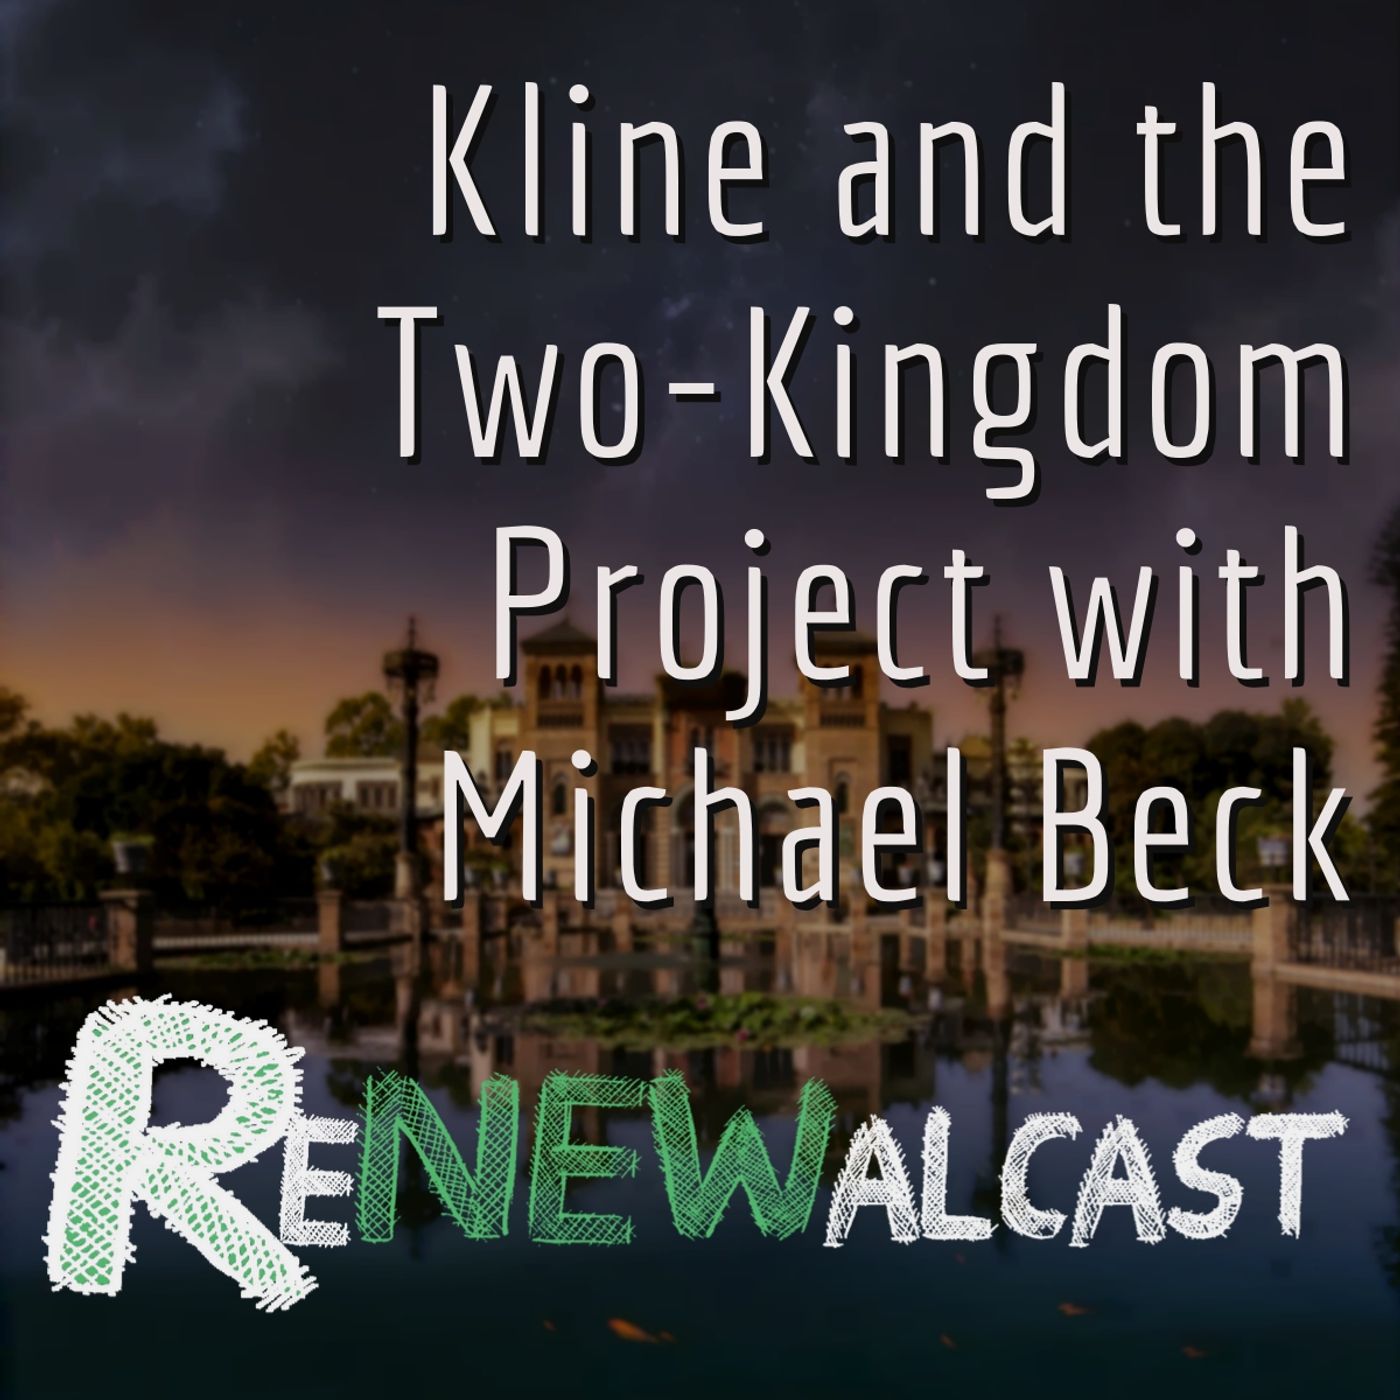 Kline and the Two-Kingdom Project With Michael Beck